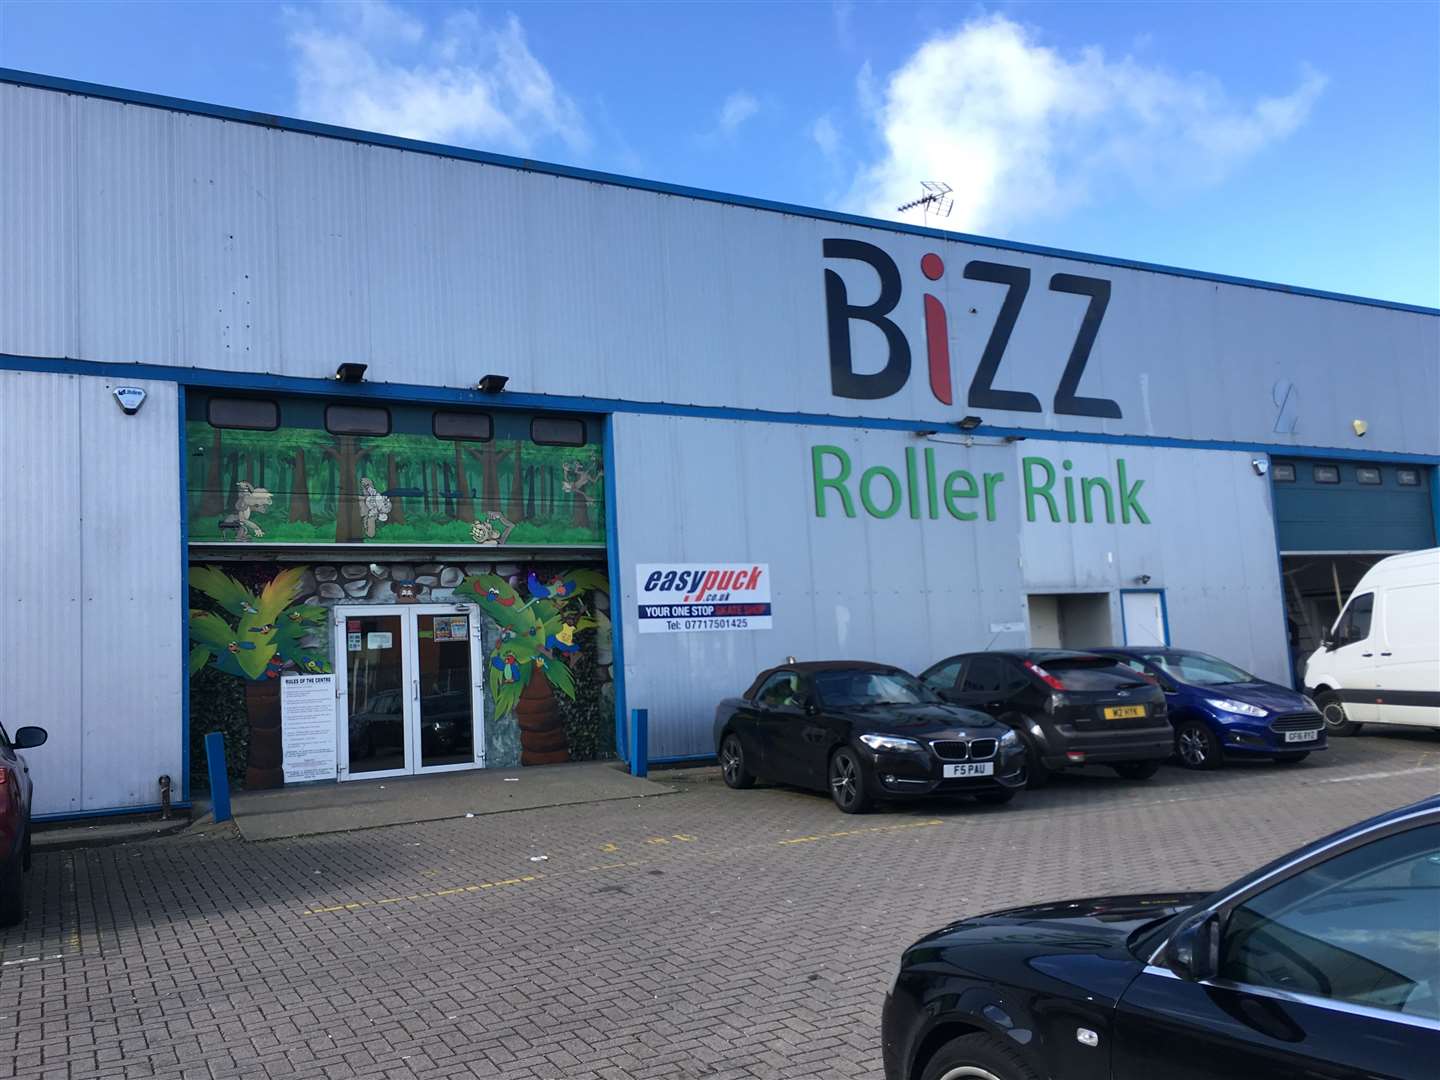 The Roller Bizz and the Bizz Gym will be closing